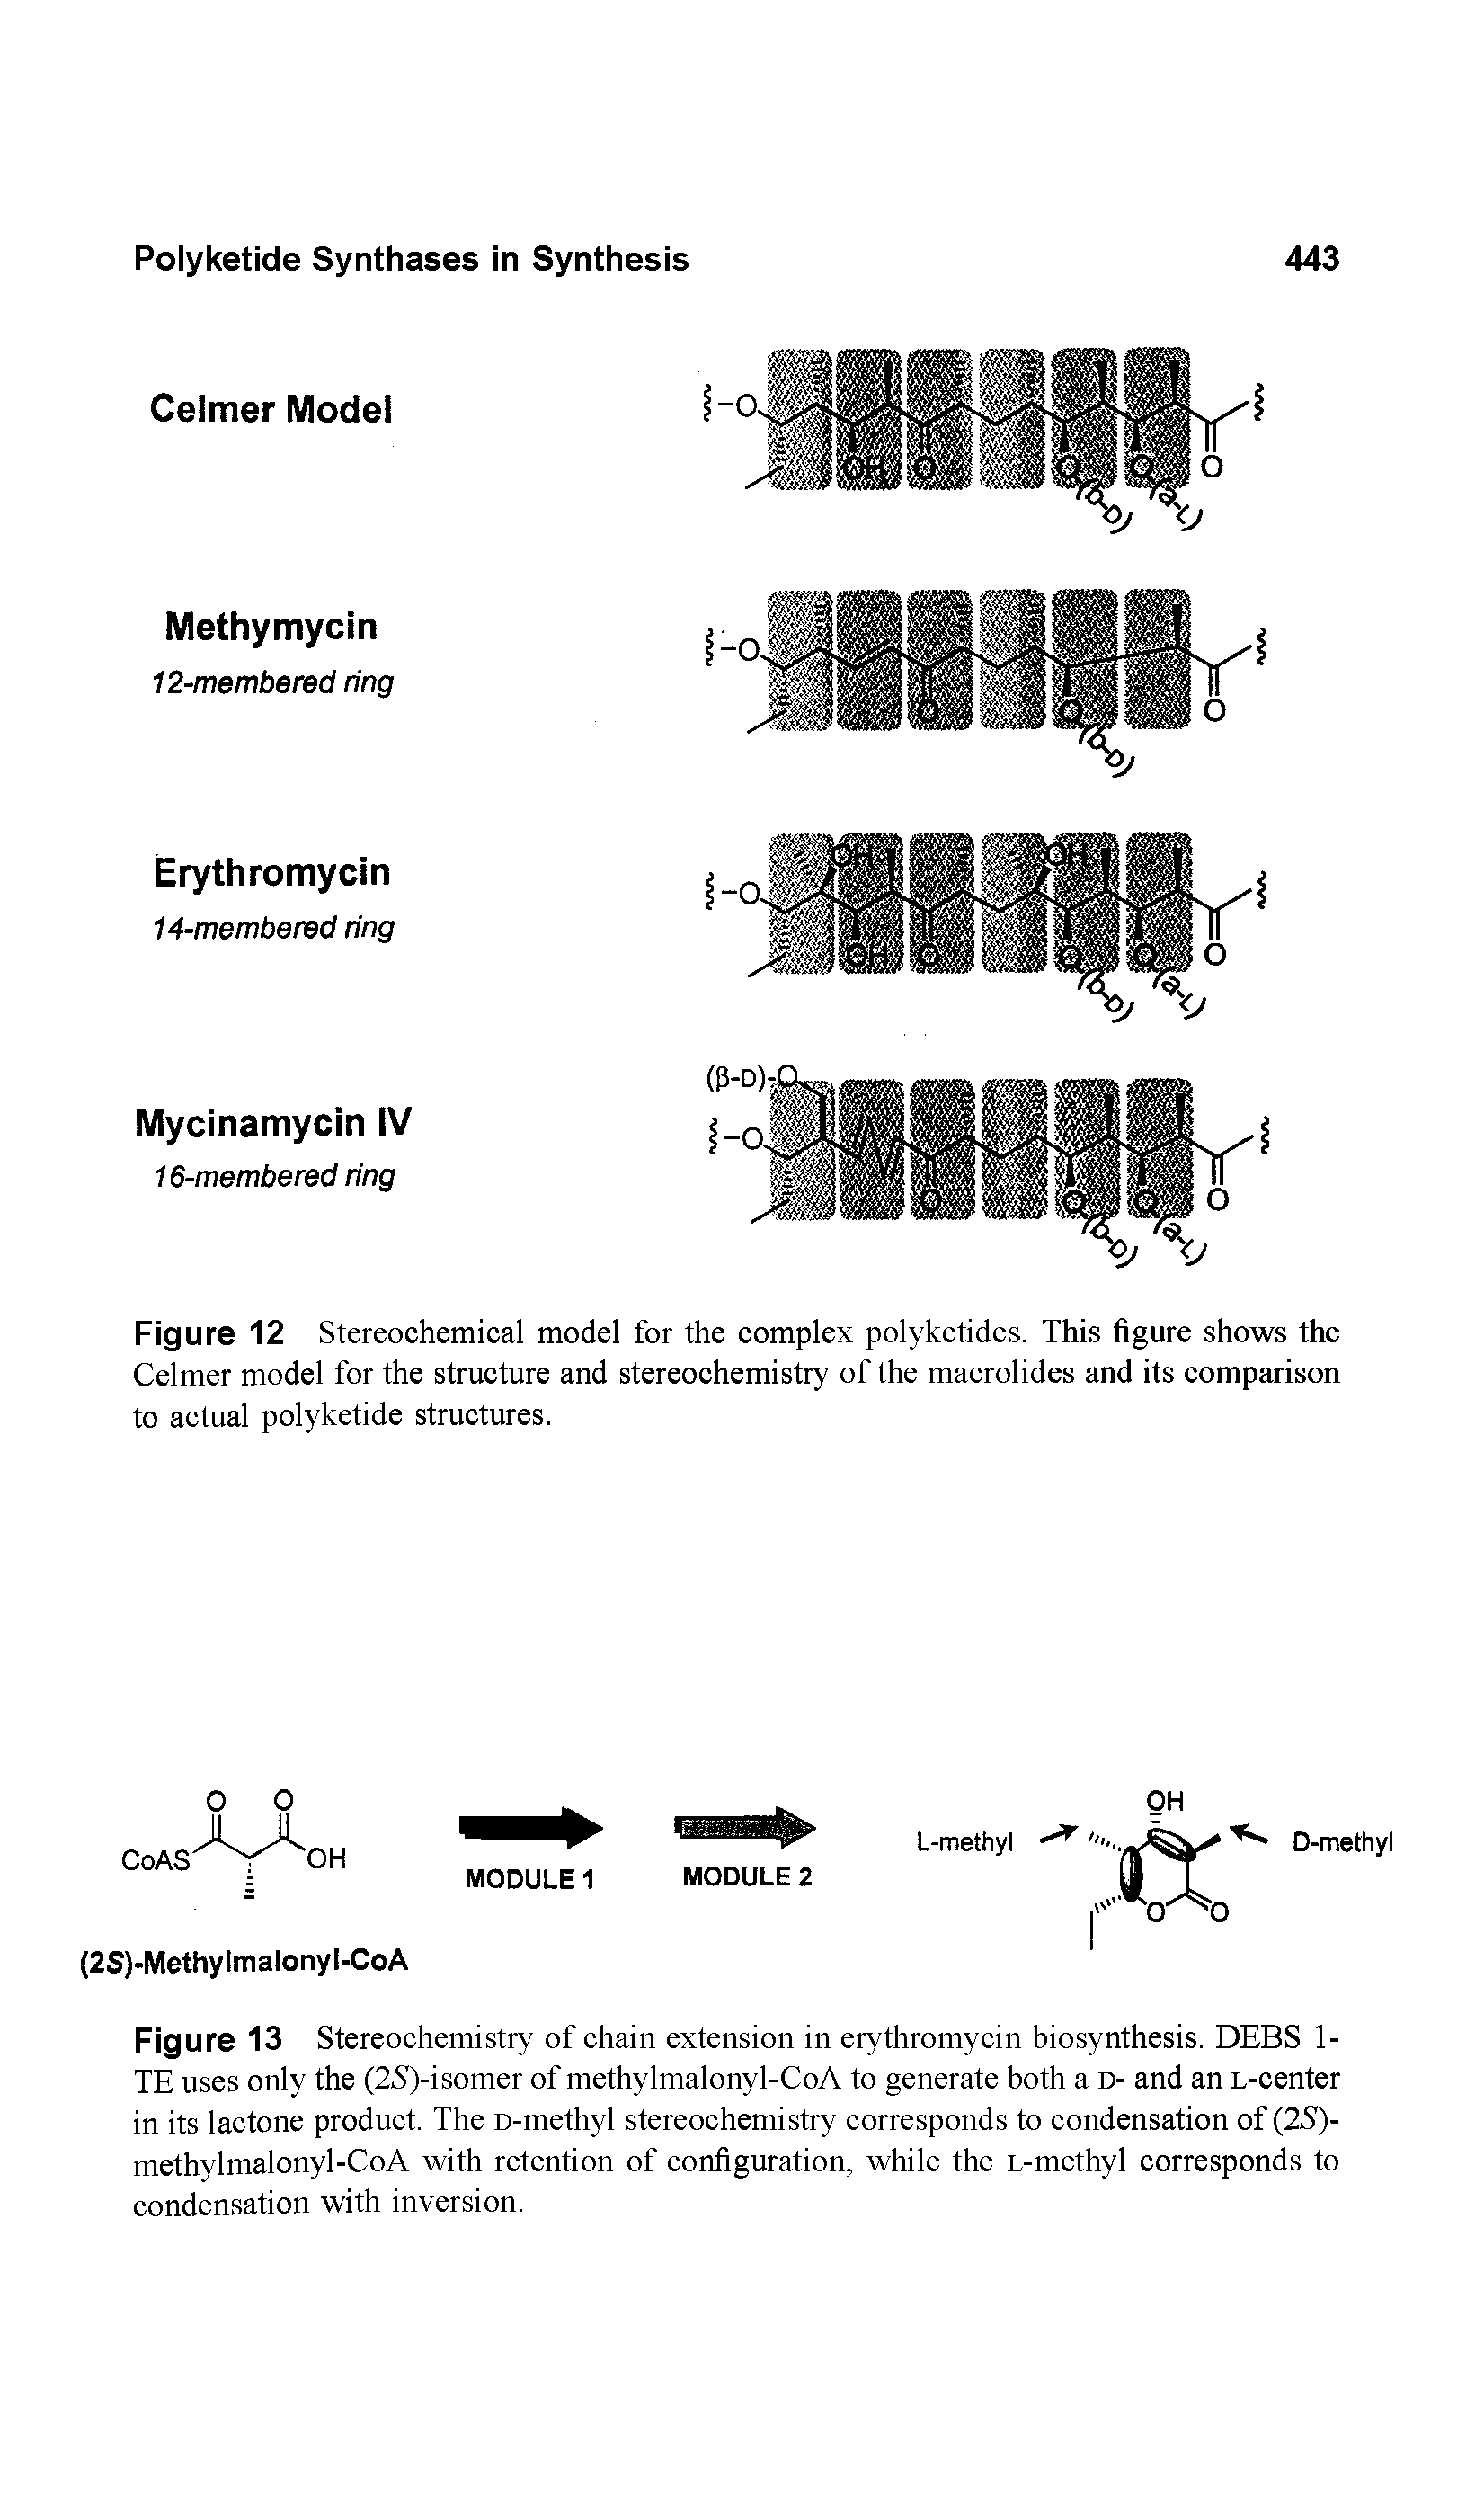 Figure 12 Stereochemical model for the complex polyketides. This figure shows the Celmer model for the structure and stereochemistry of the macrolides and its comparison to actual polyketide structures.